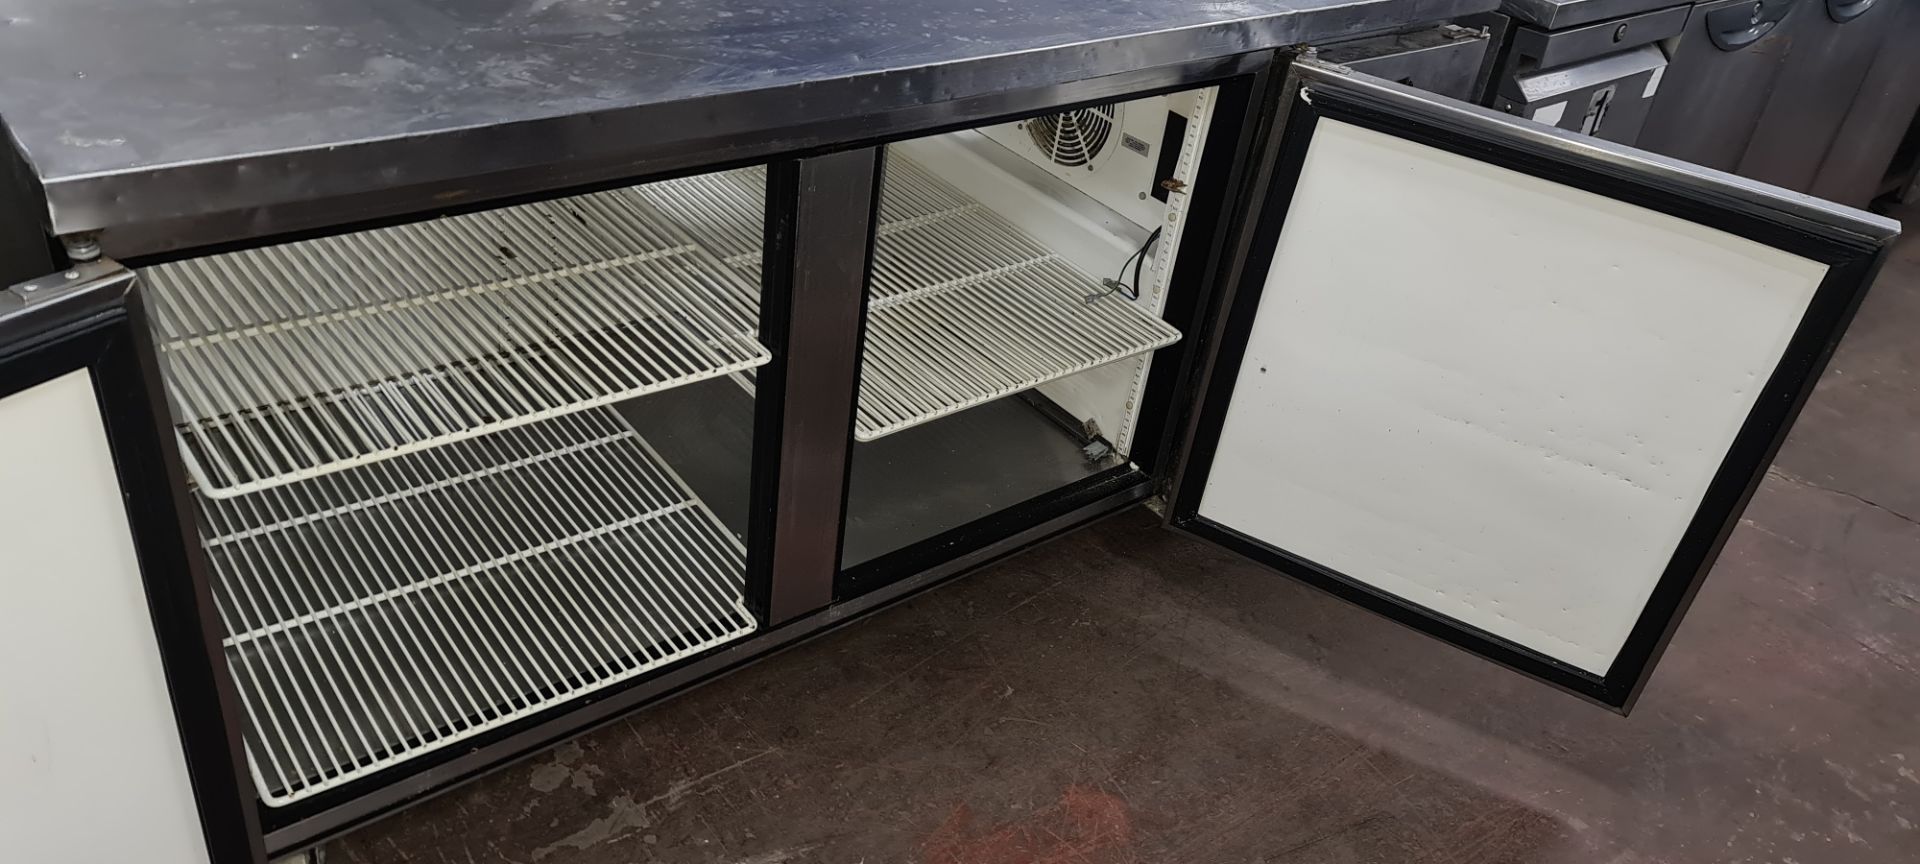 4 off assorted stainless steel refrigerated prep cabinets - Image 12 of 28